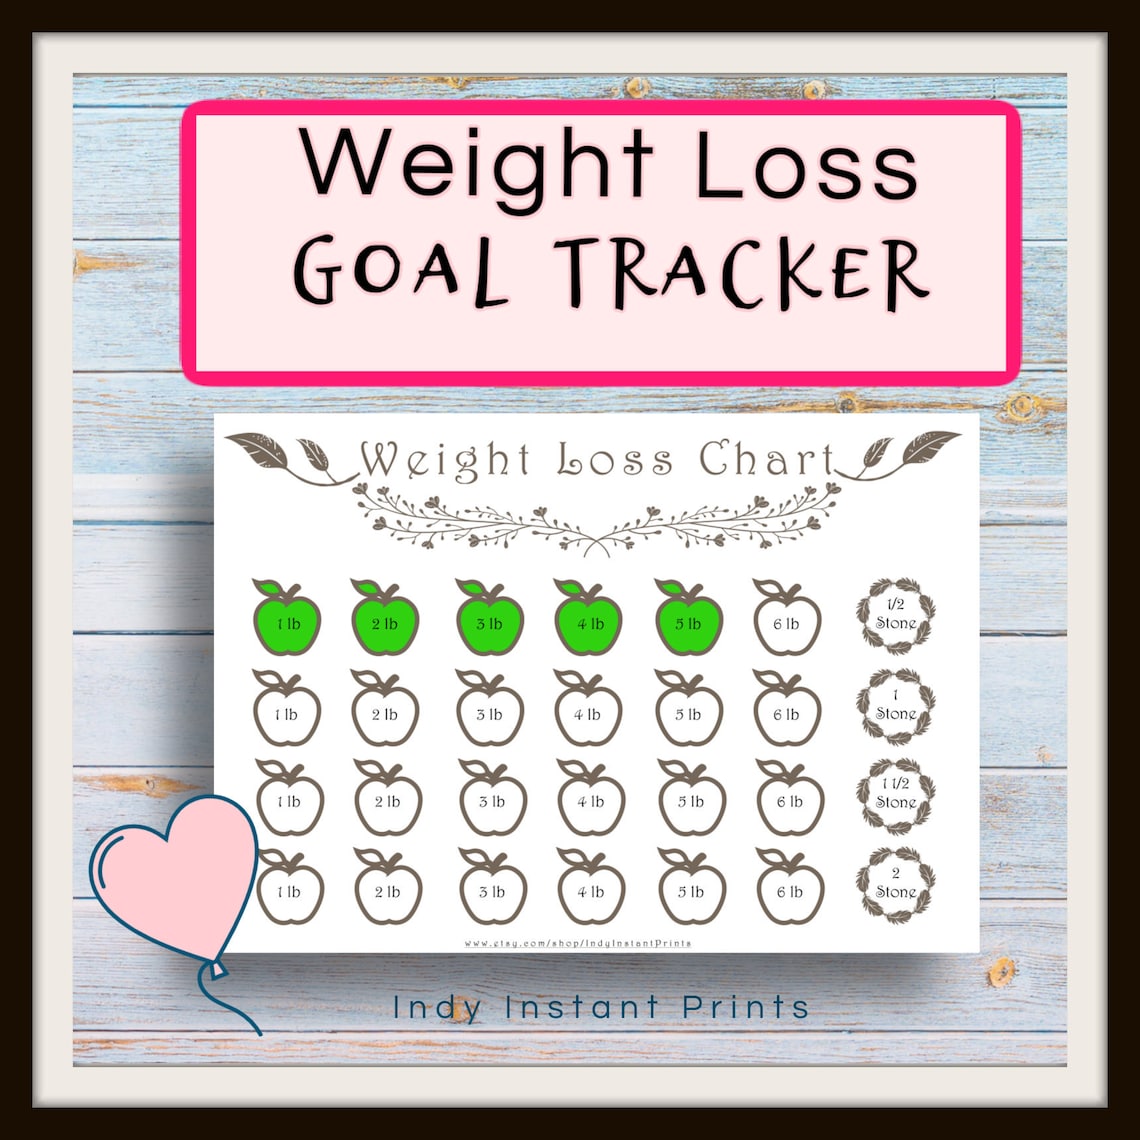 weight-loss-goal-tracker-chart-track-your-way-to-losing-2-stone-one